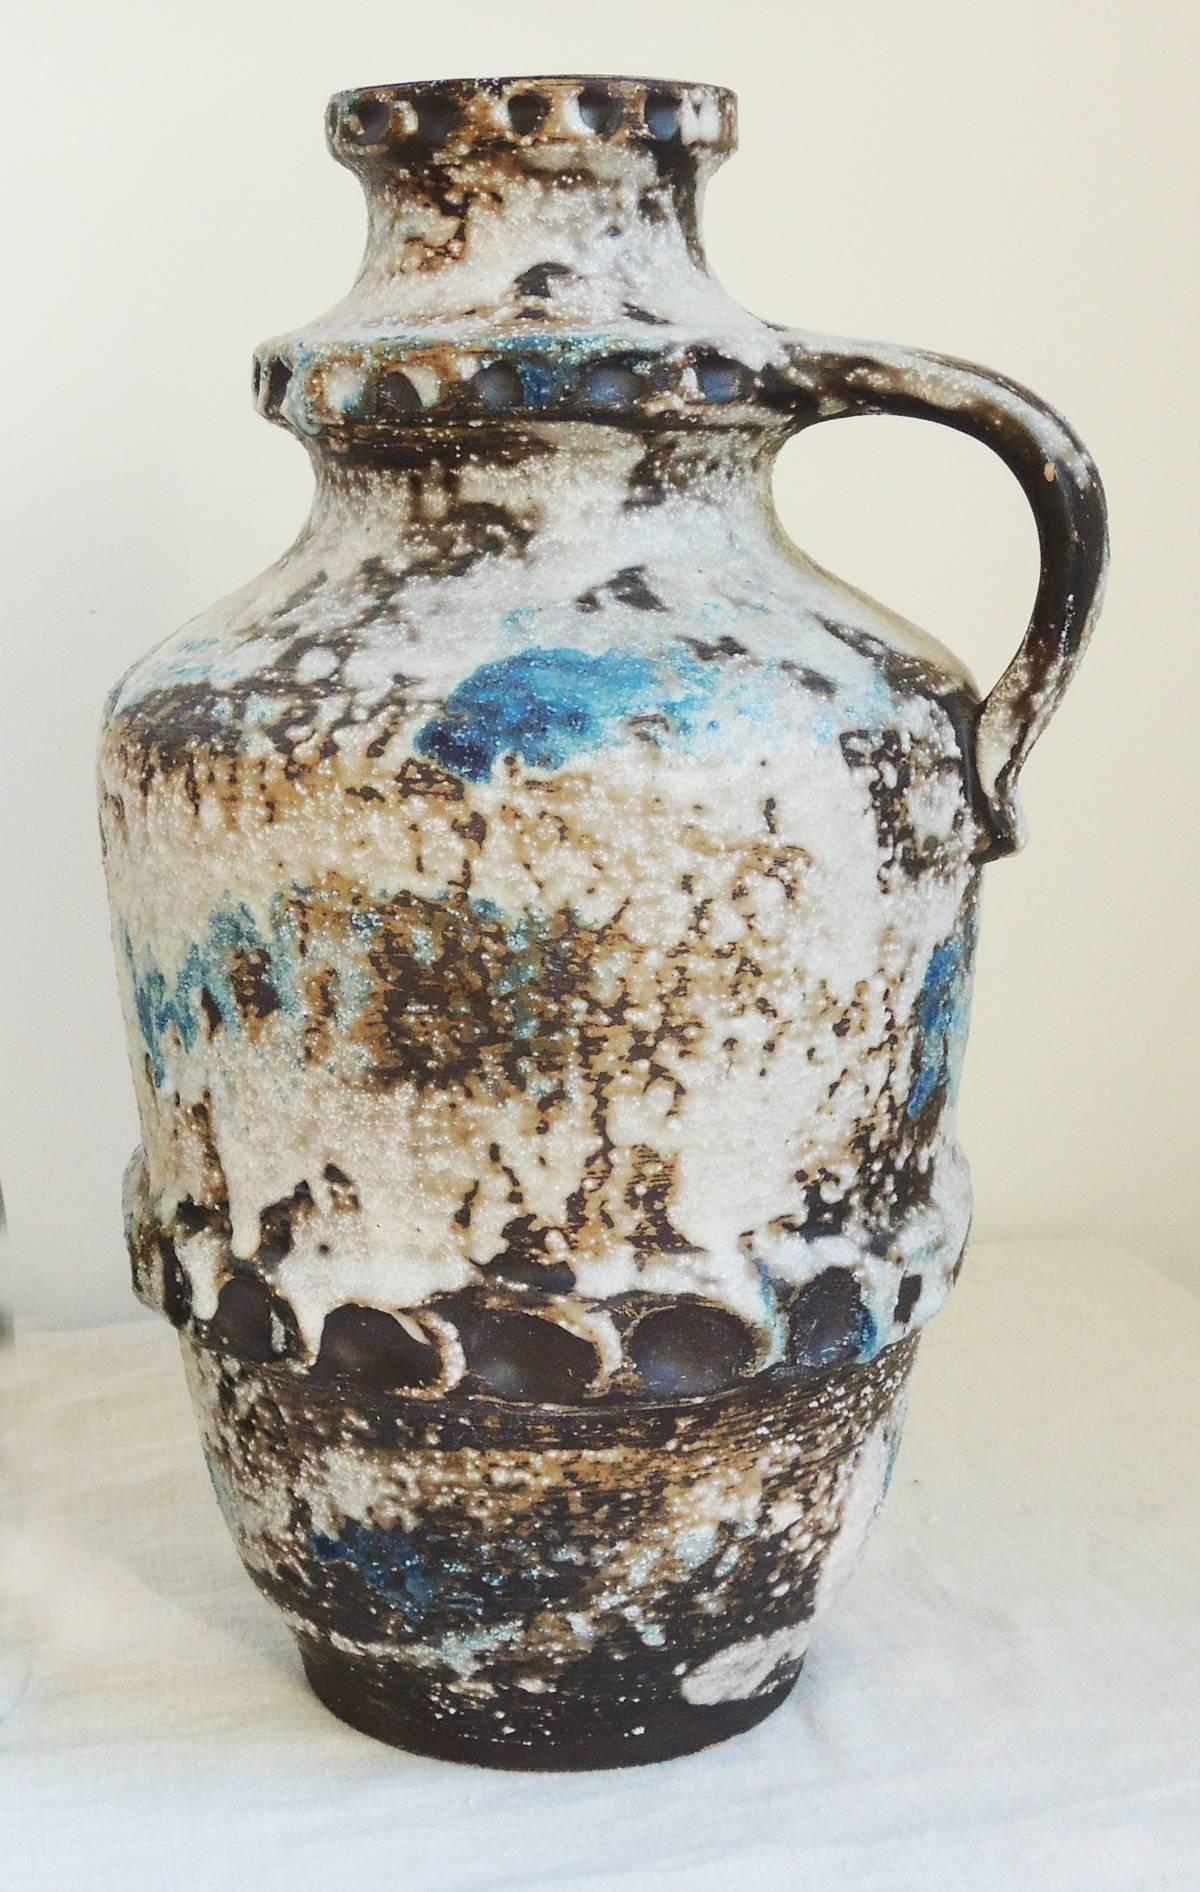 An imposing piece of sculptural ceramics, in the shape of a pitcher.
Great texture, color, incised details.
Marked on base.